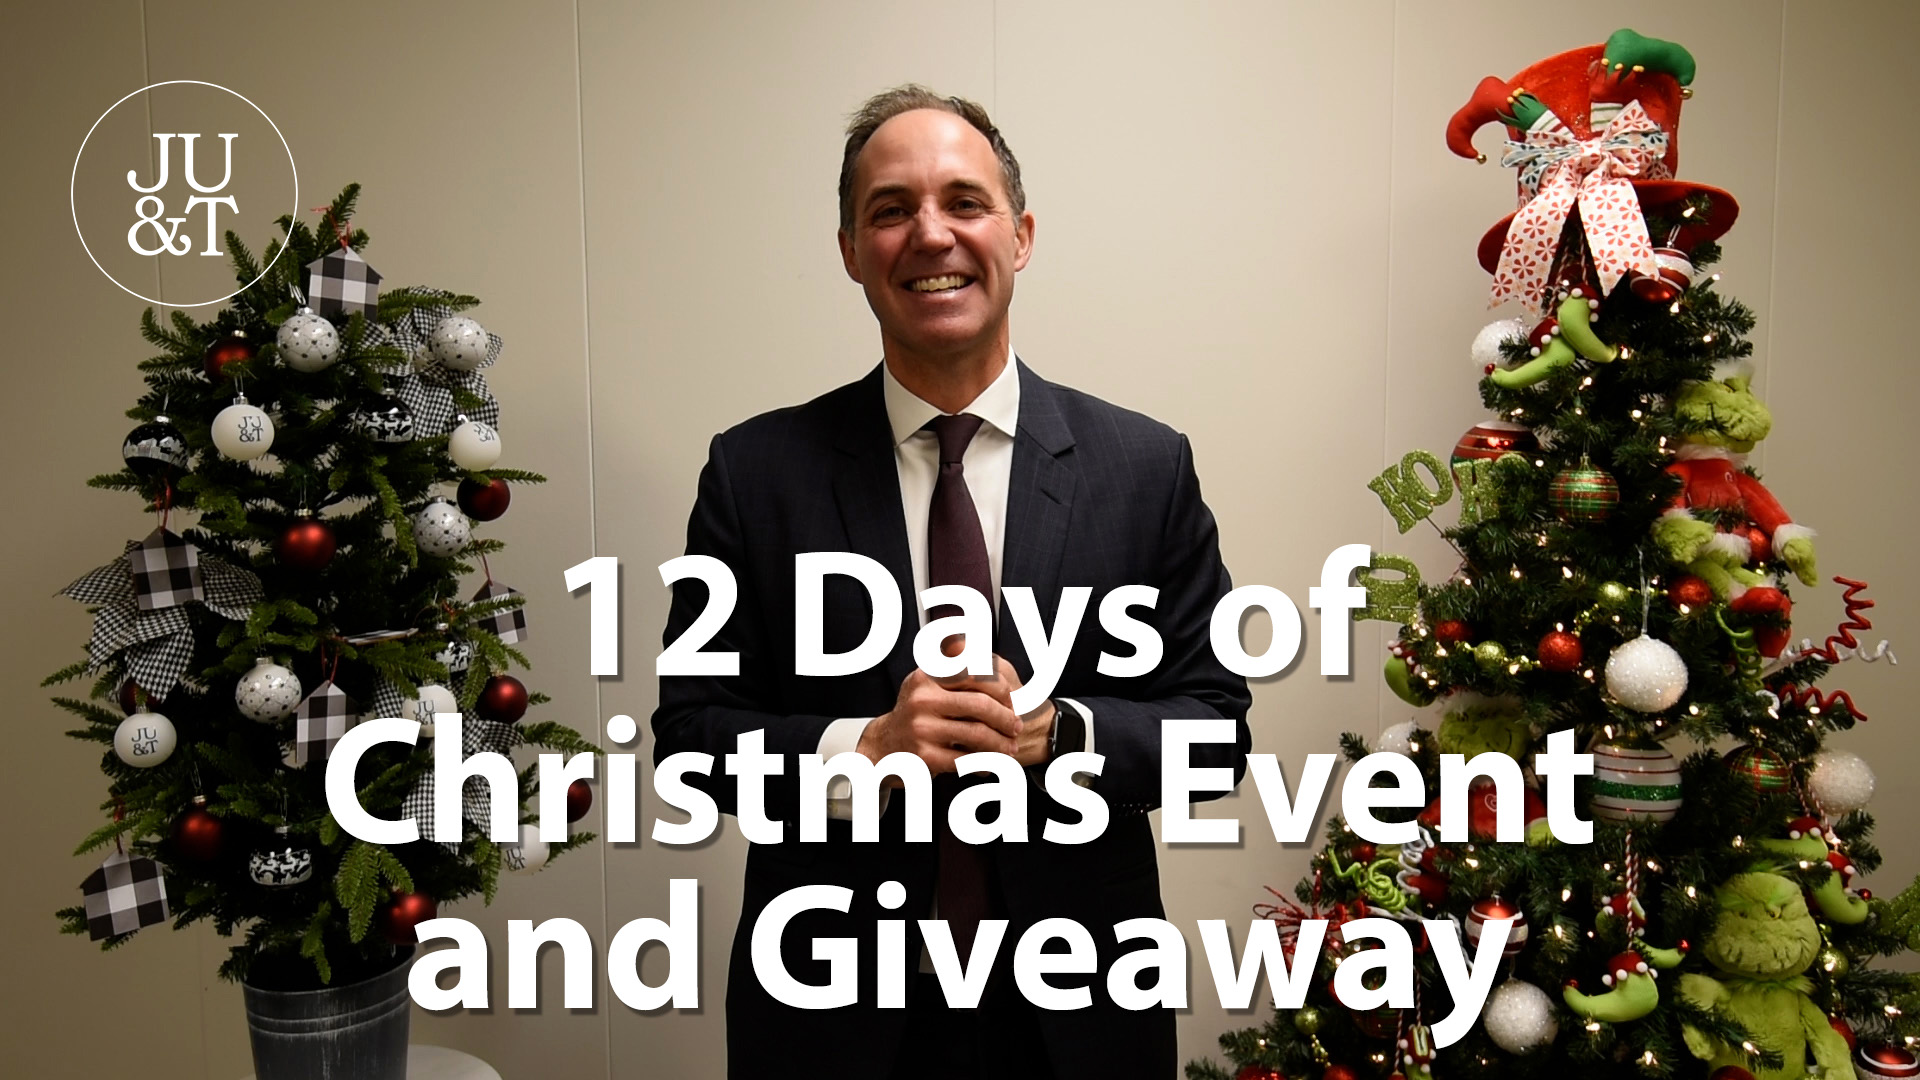 RSVP to Our 12 Days of Christmas Event